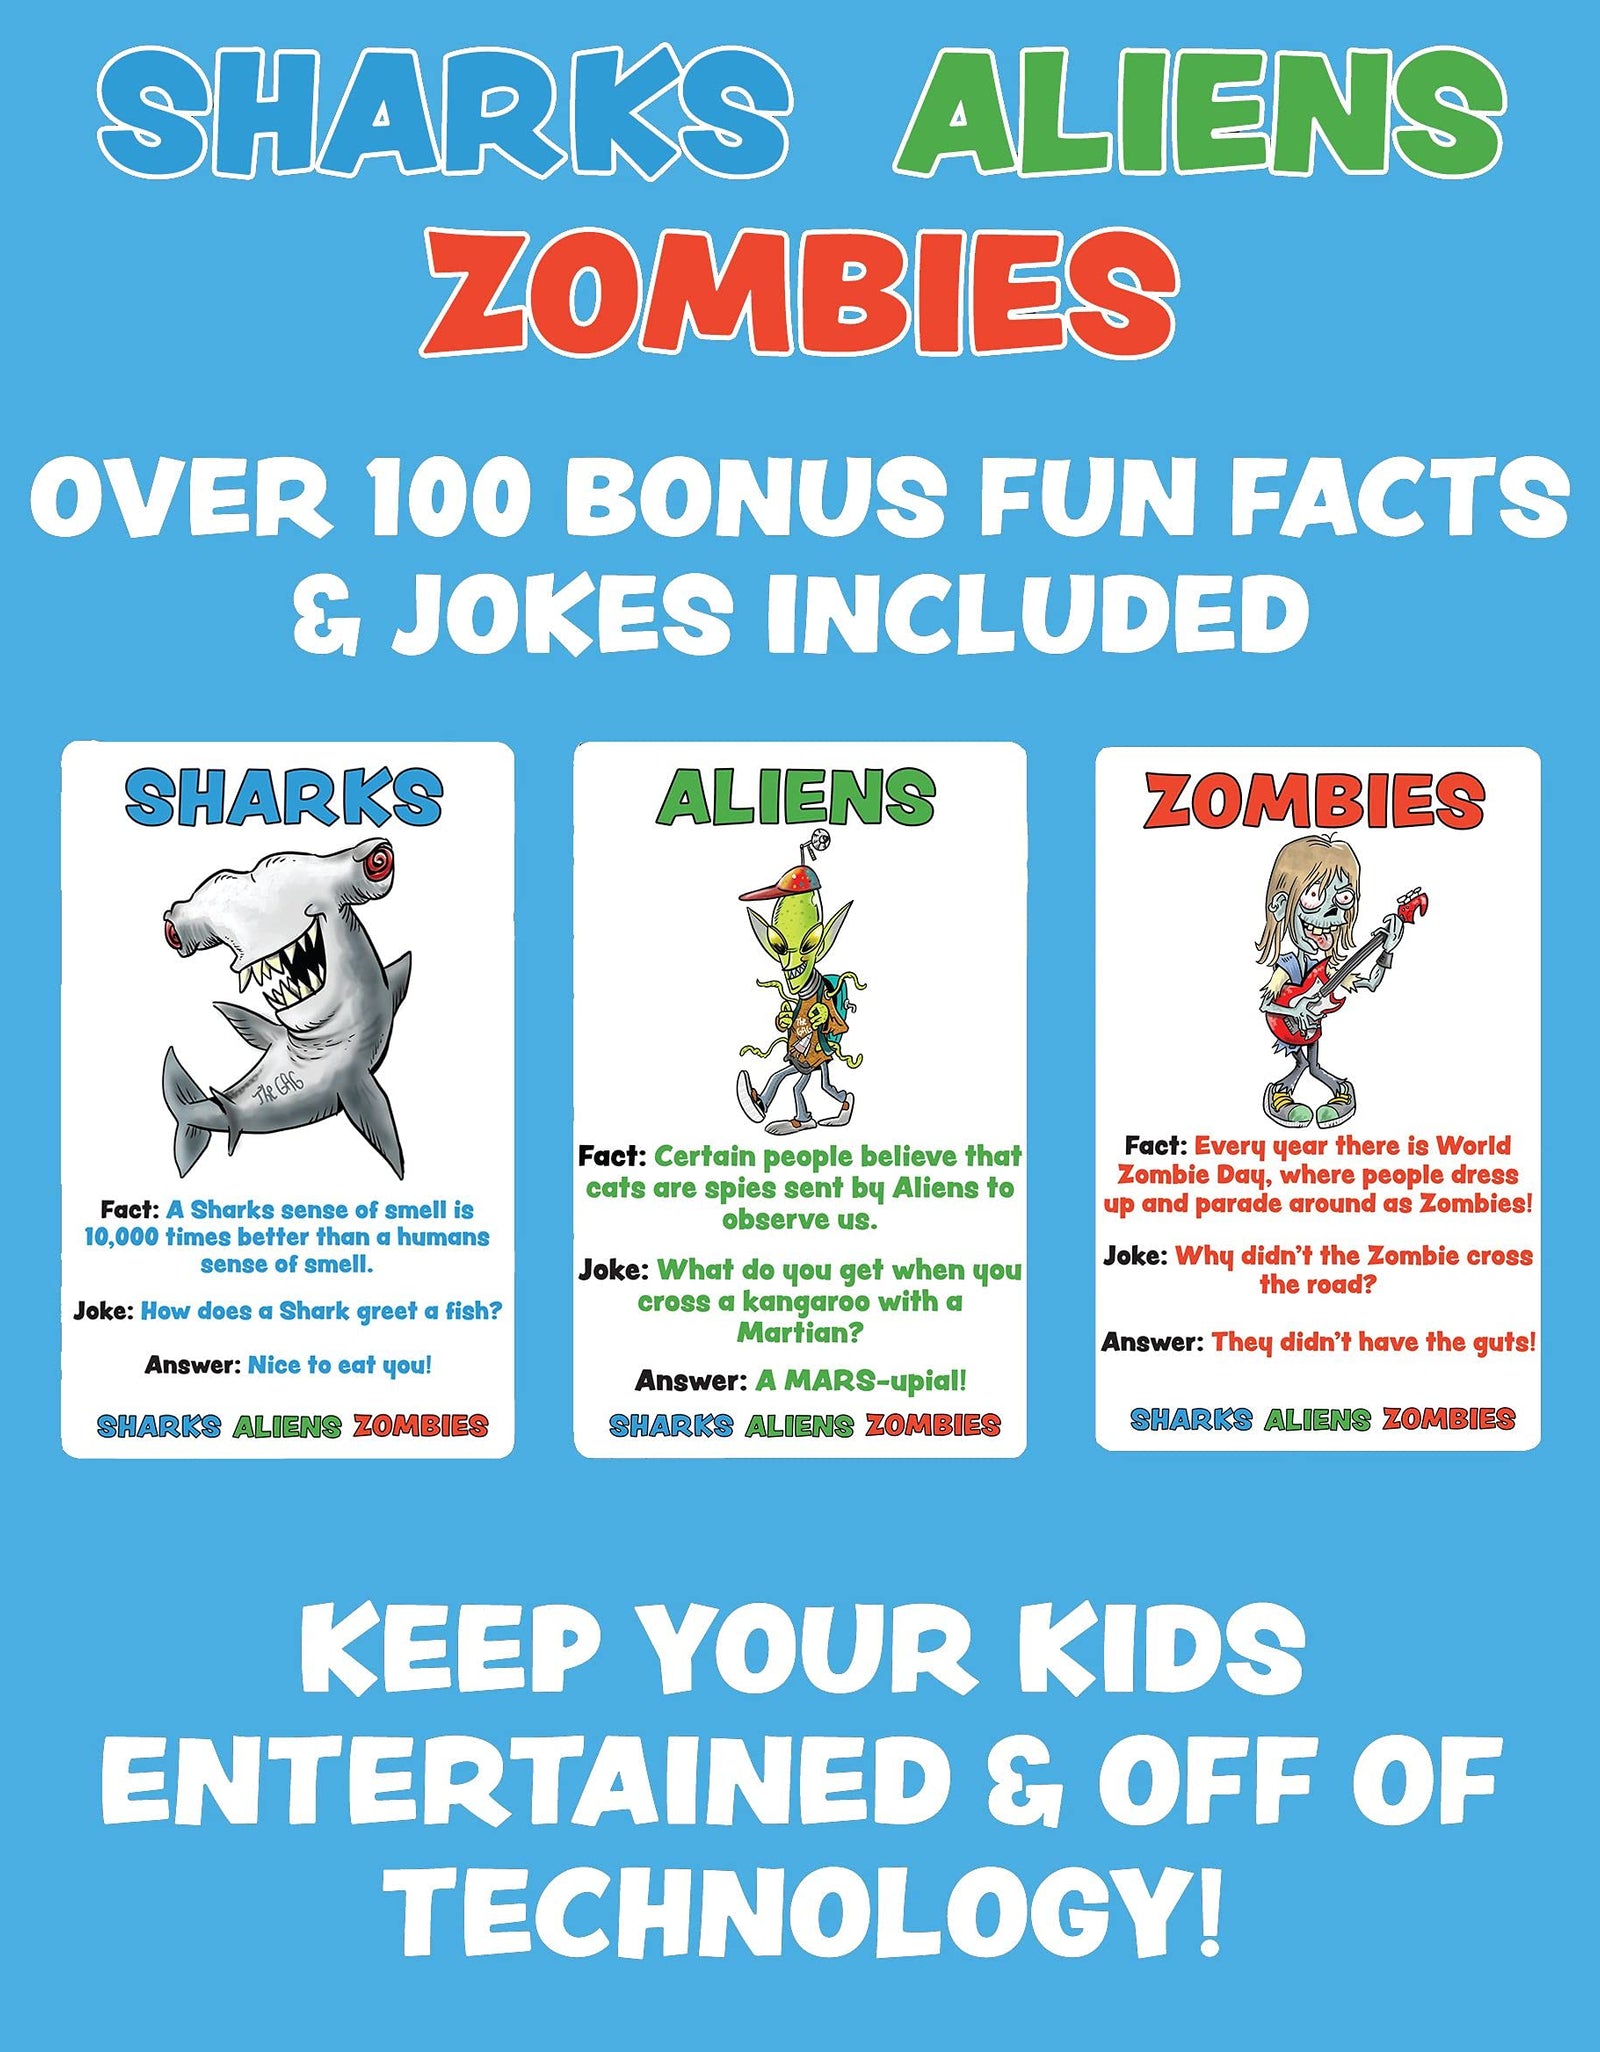 Sharks Aliens Zombies: Fun Card Game for Kids Played Like Rock Paper Scissors War for Boys Girls Family Game Night Gift Giving